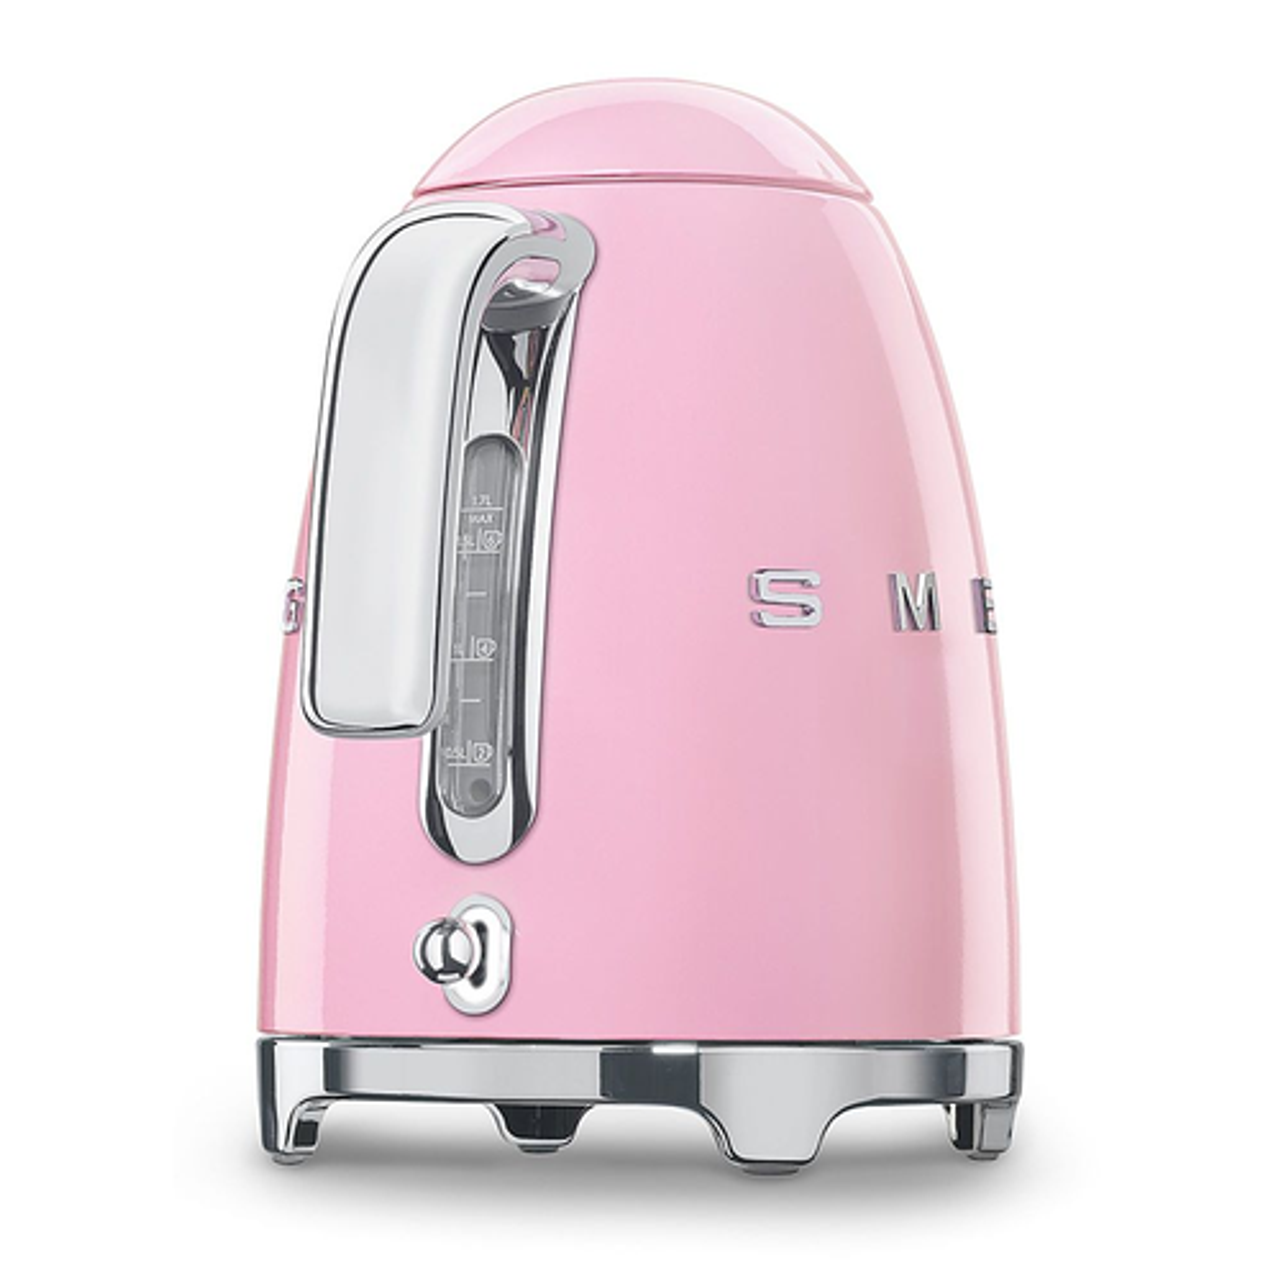 SMEG - KLF03 7-Cup Electric Kettle - Pink